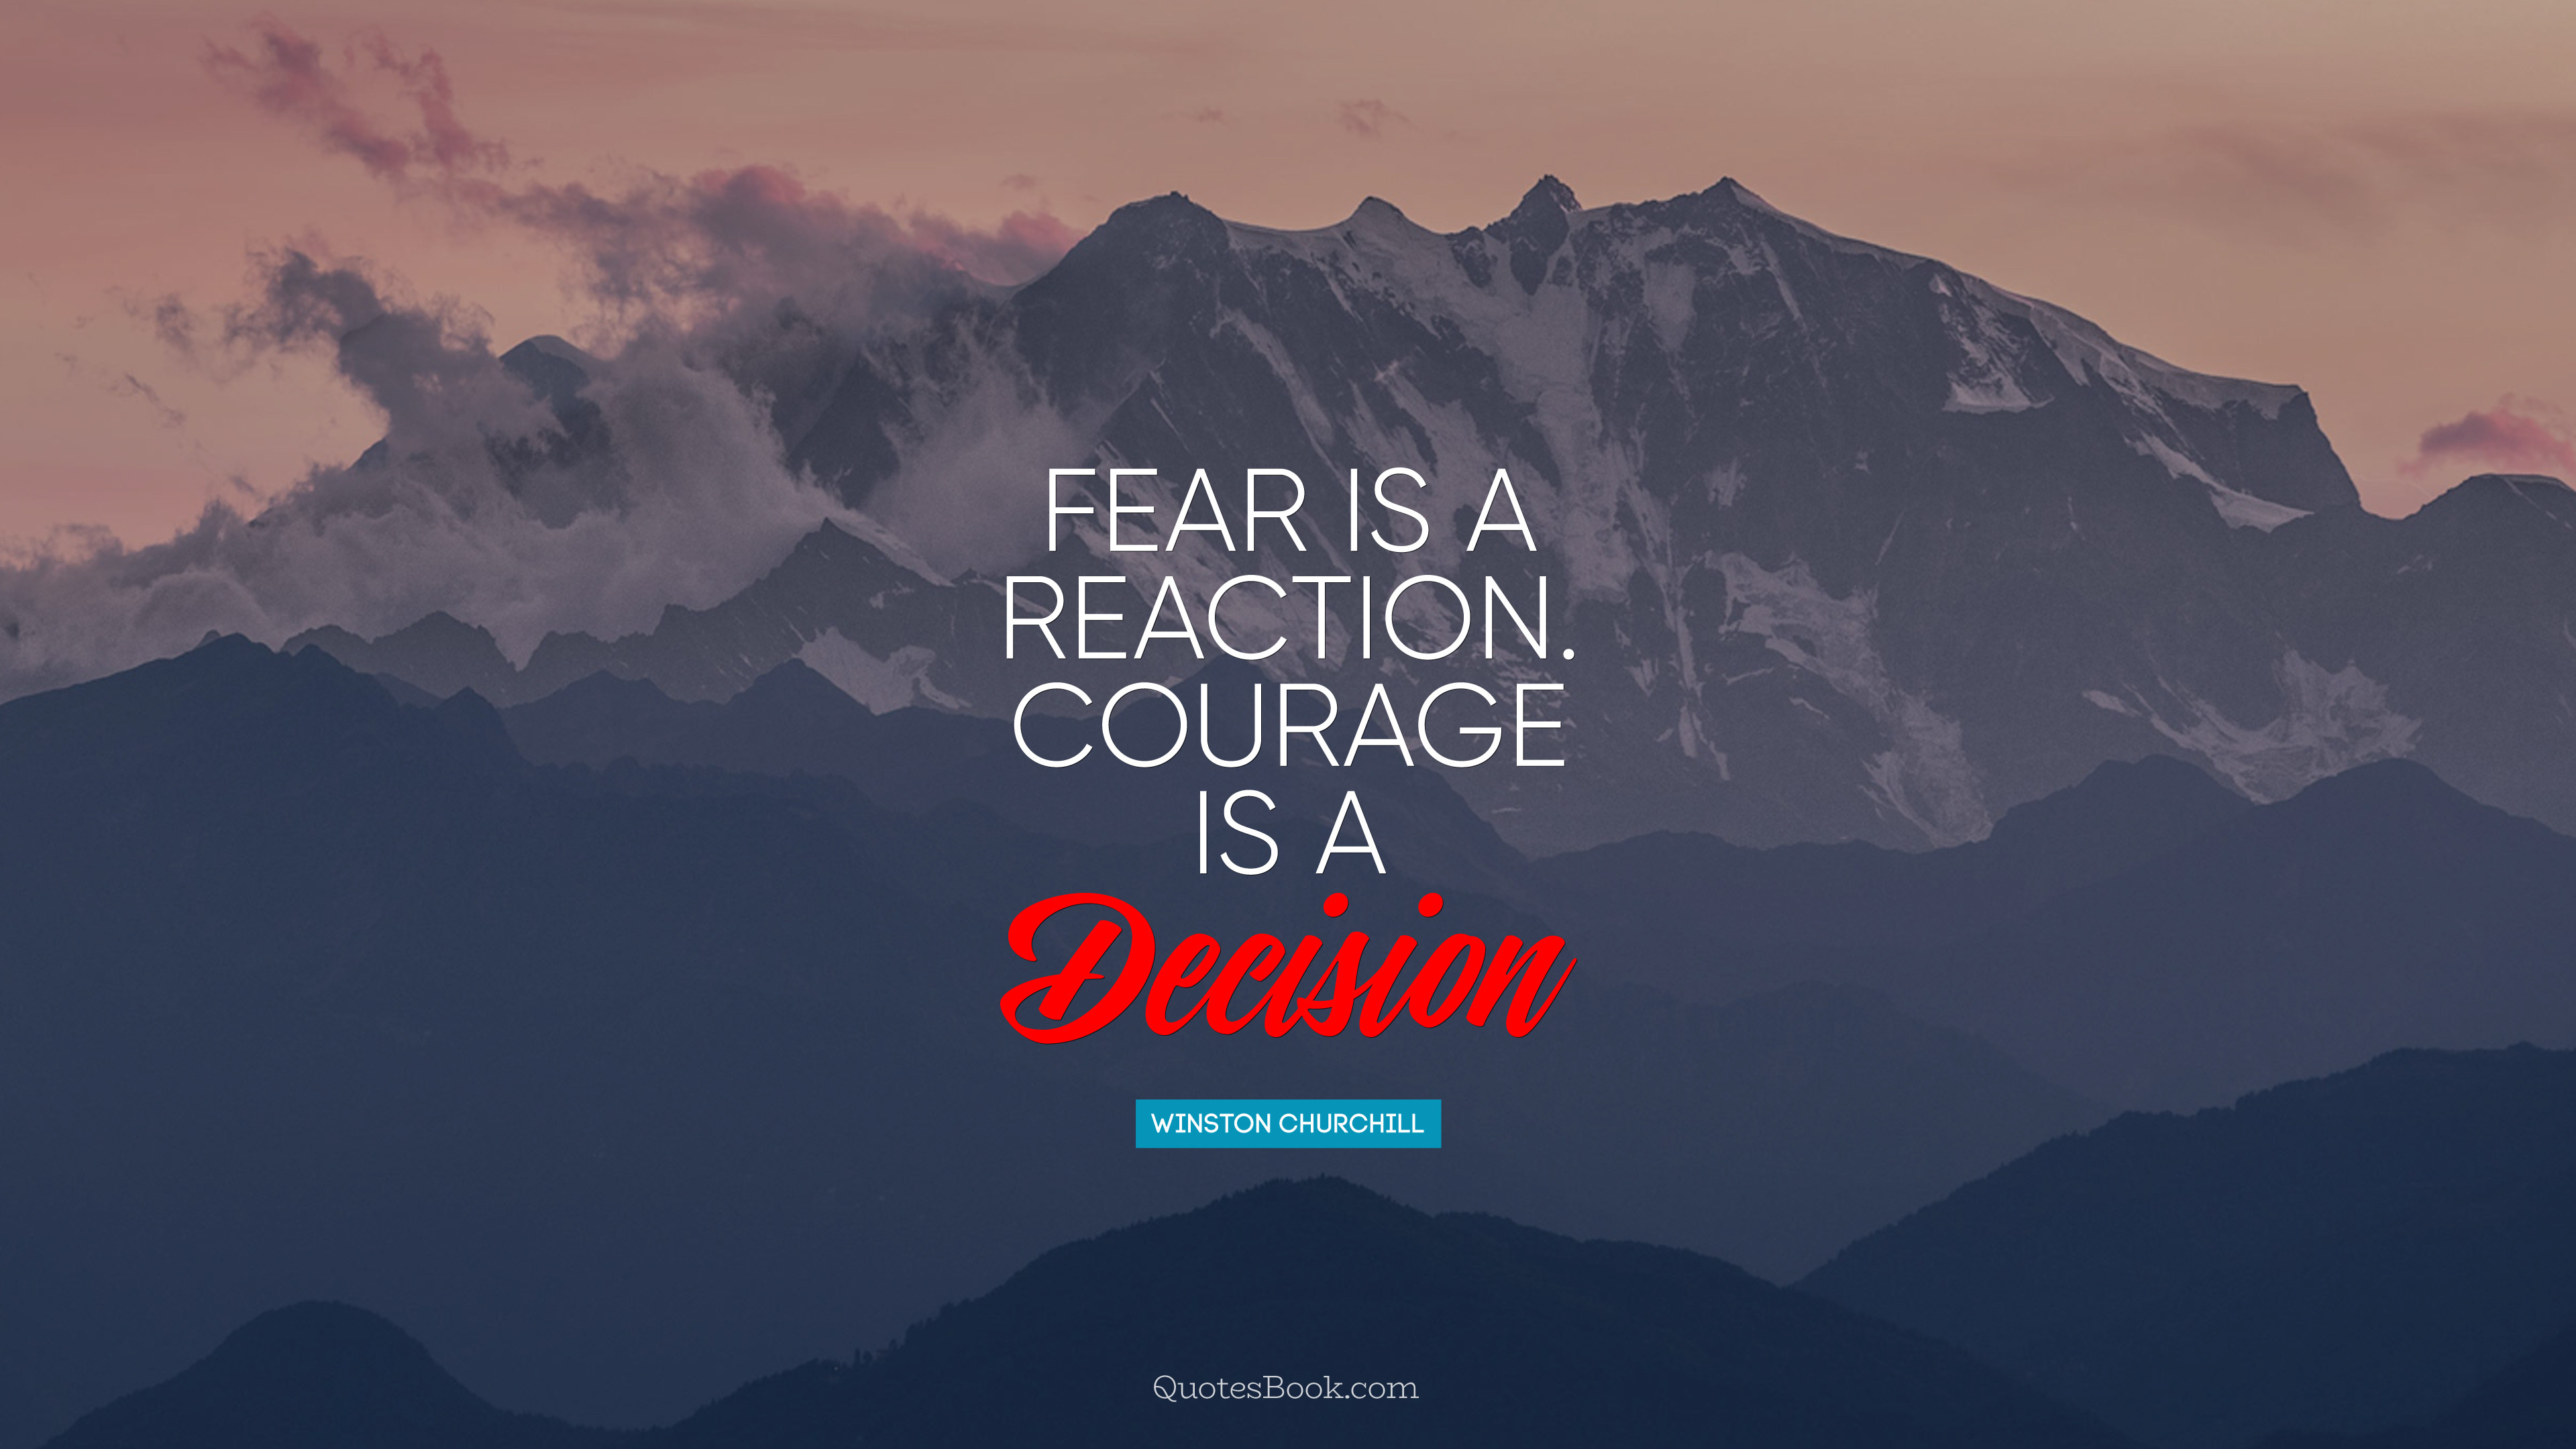 Fear is a reaction. Courage is a decision. - Quote by Winston Churchill